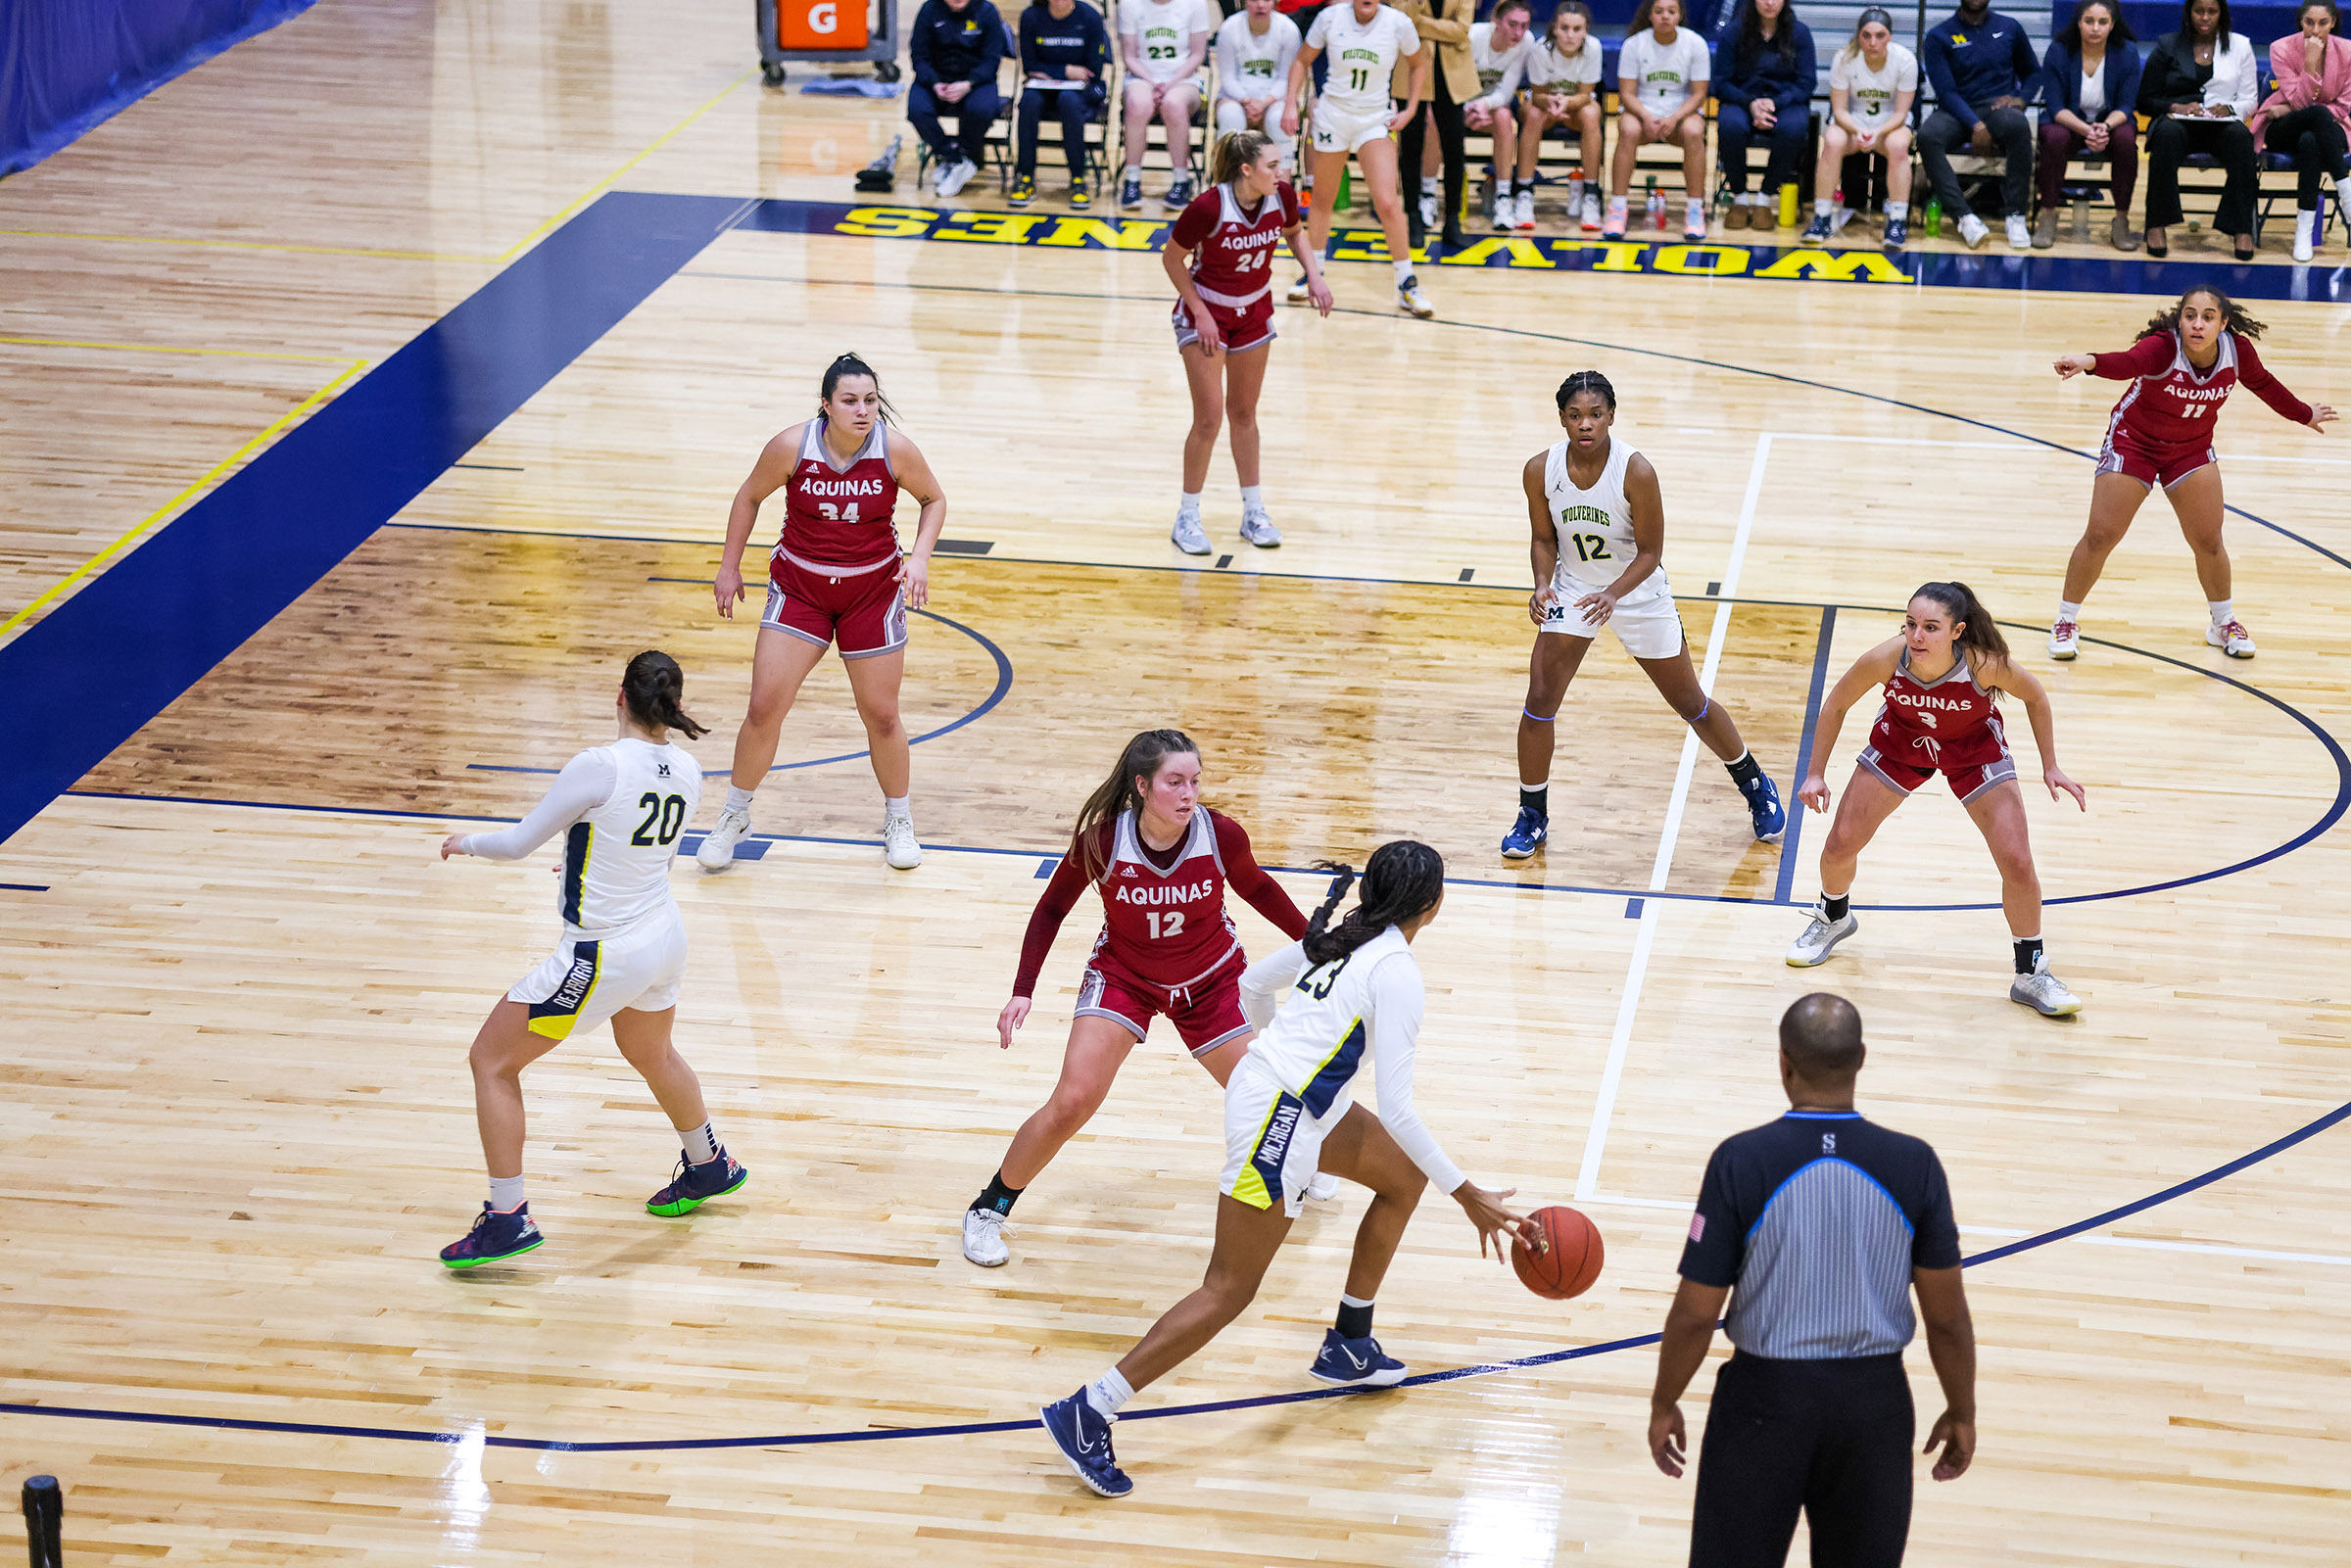 The women's basketball team playing Aquinas College on the new hardwood floor at the UM-Dearborn Fieldhouse